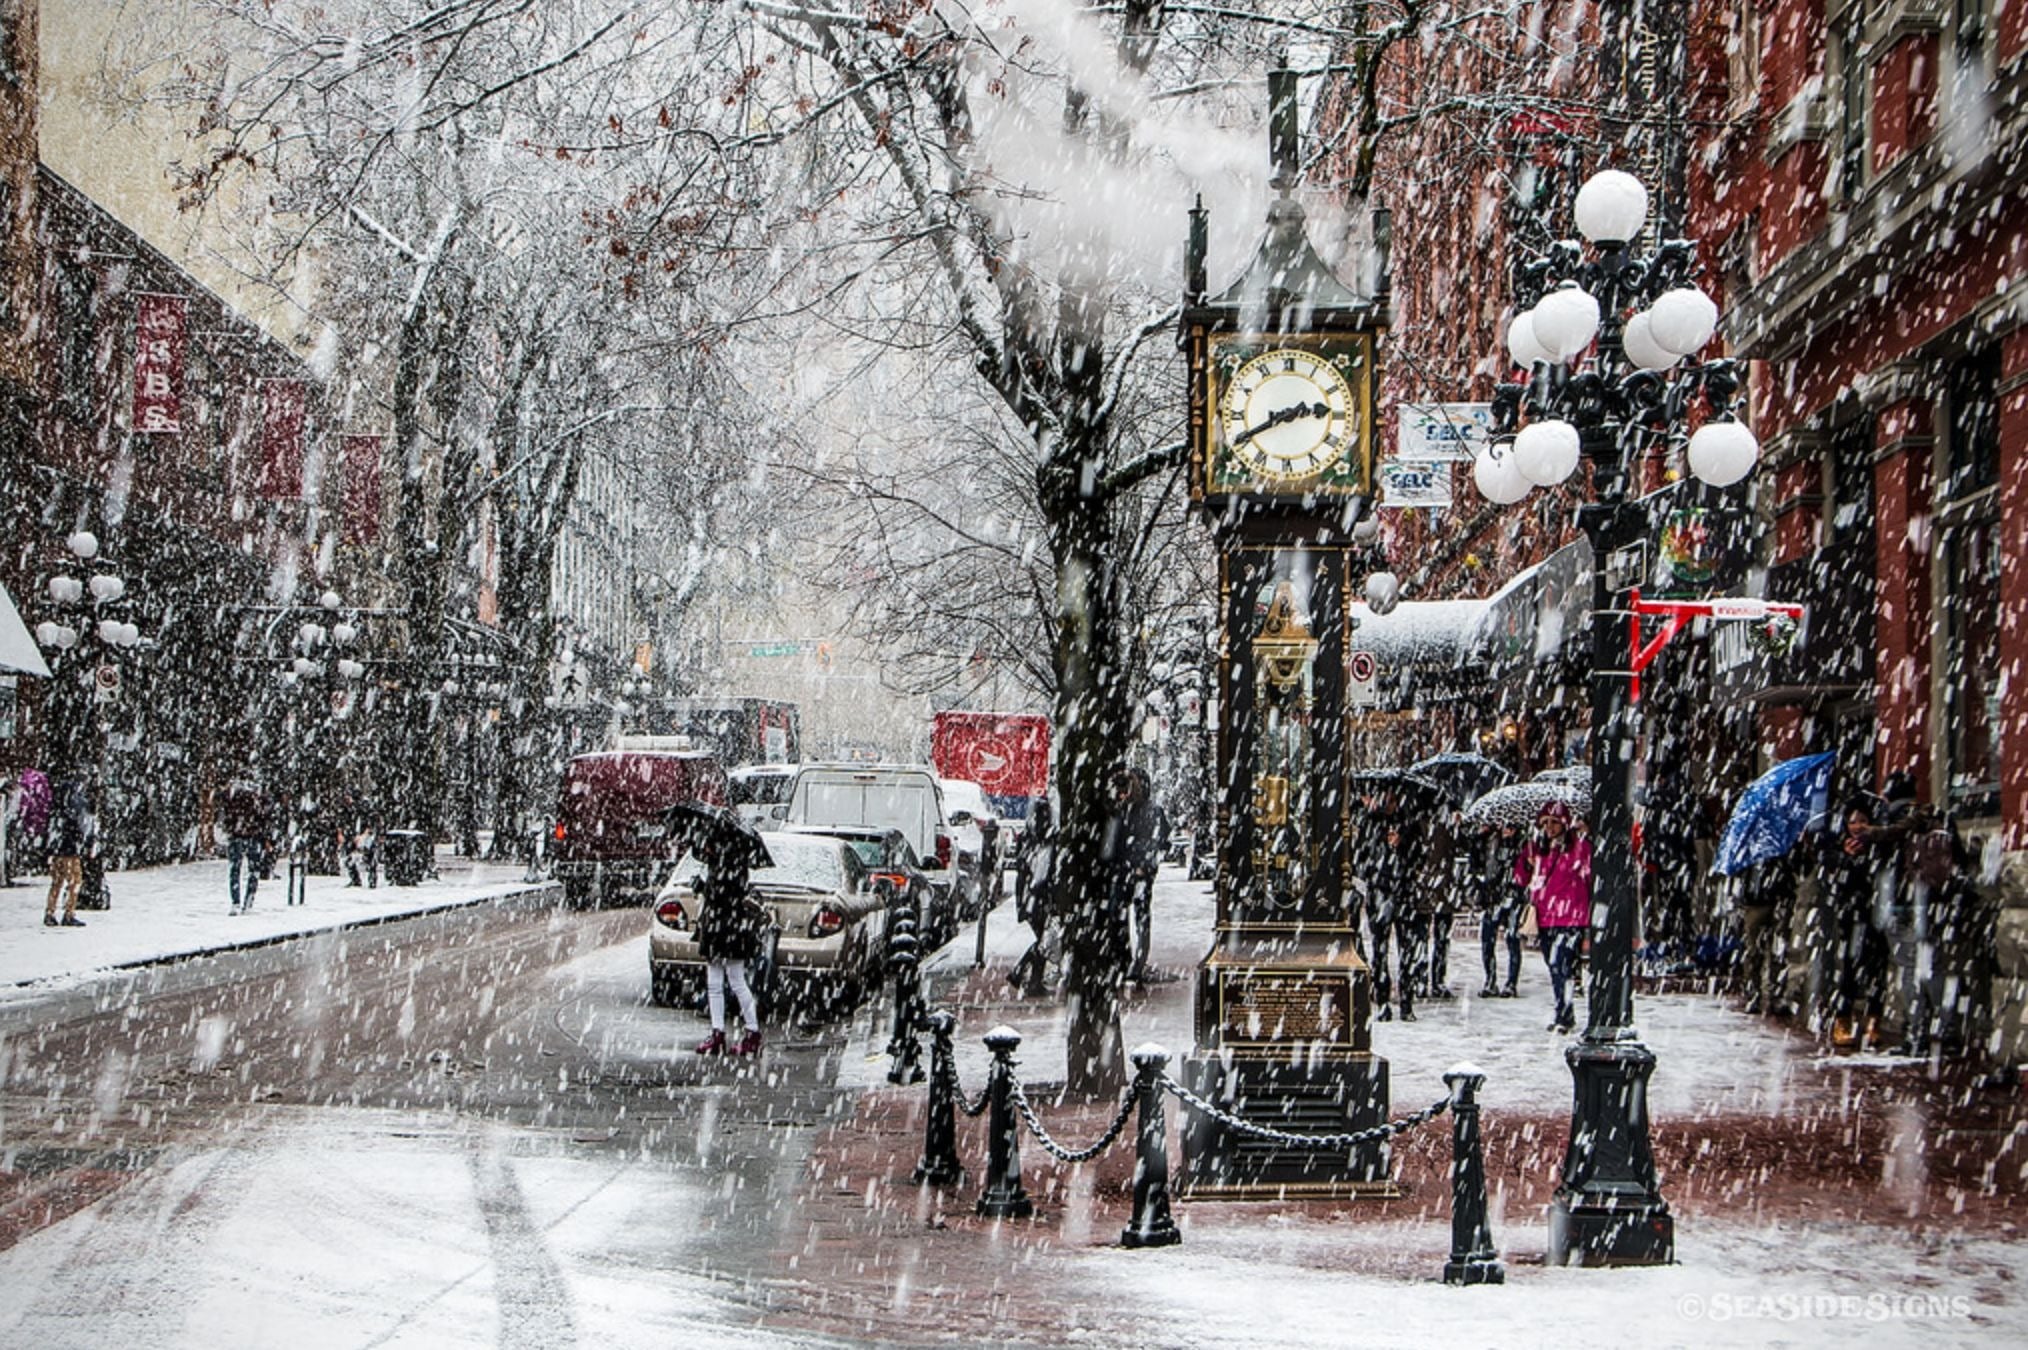 The Best Things To Do And See In Vancouver This Winter